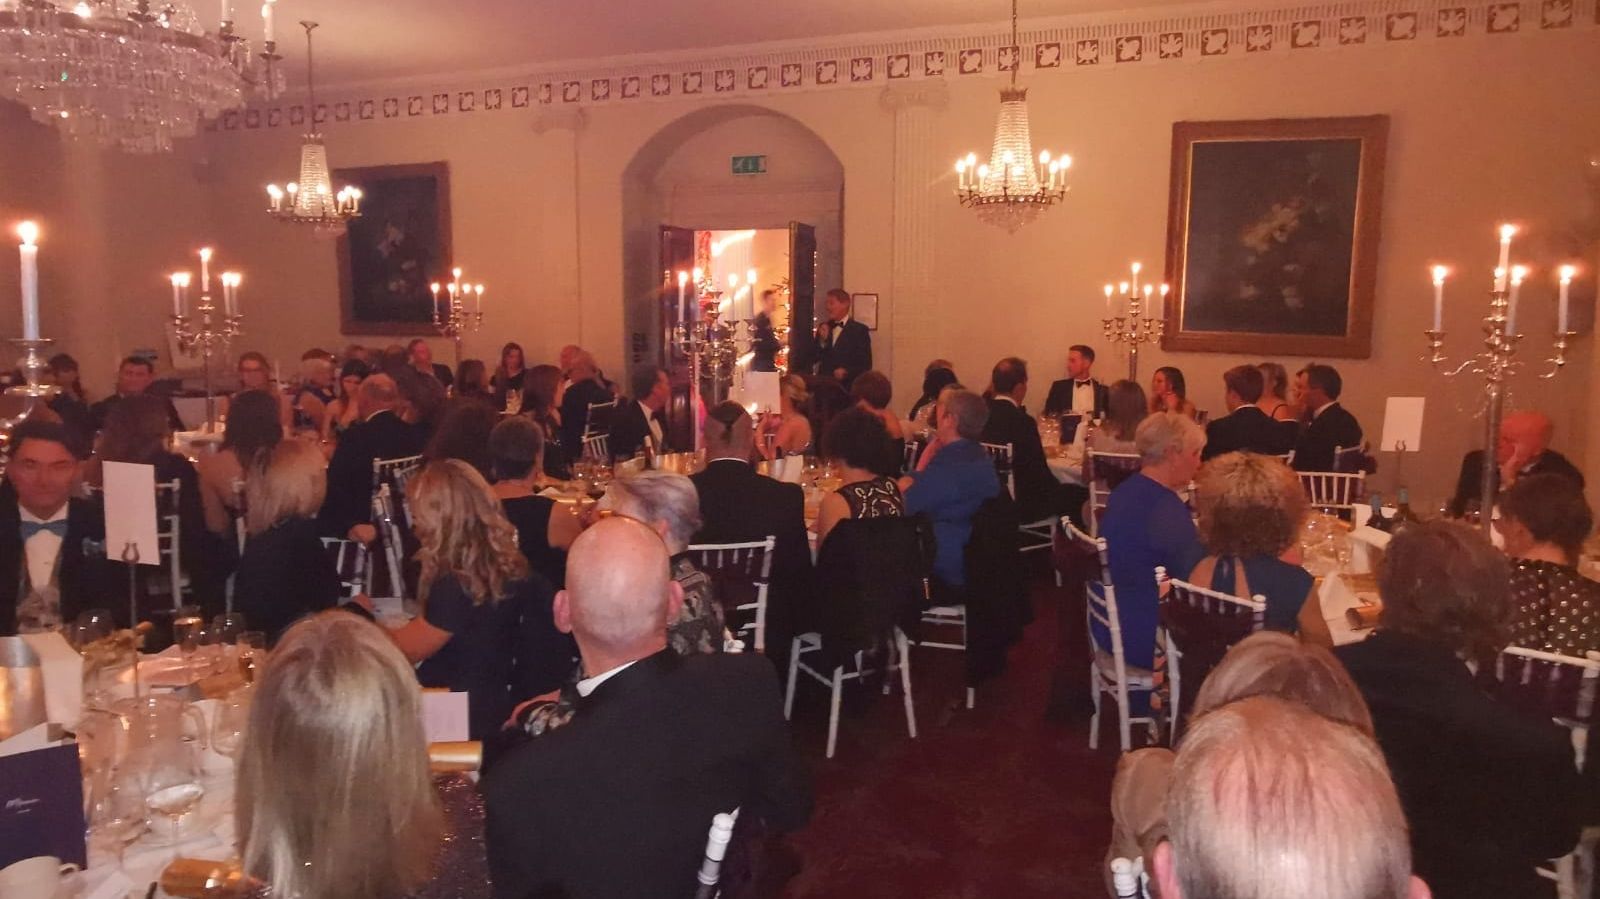 Over £12,000 raised at our Christmas Ball